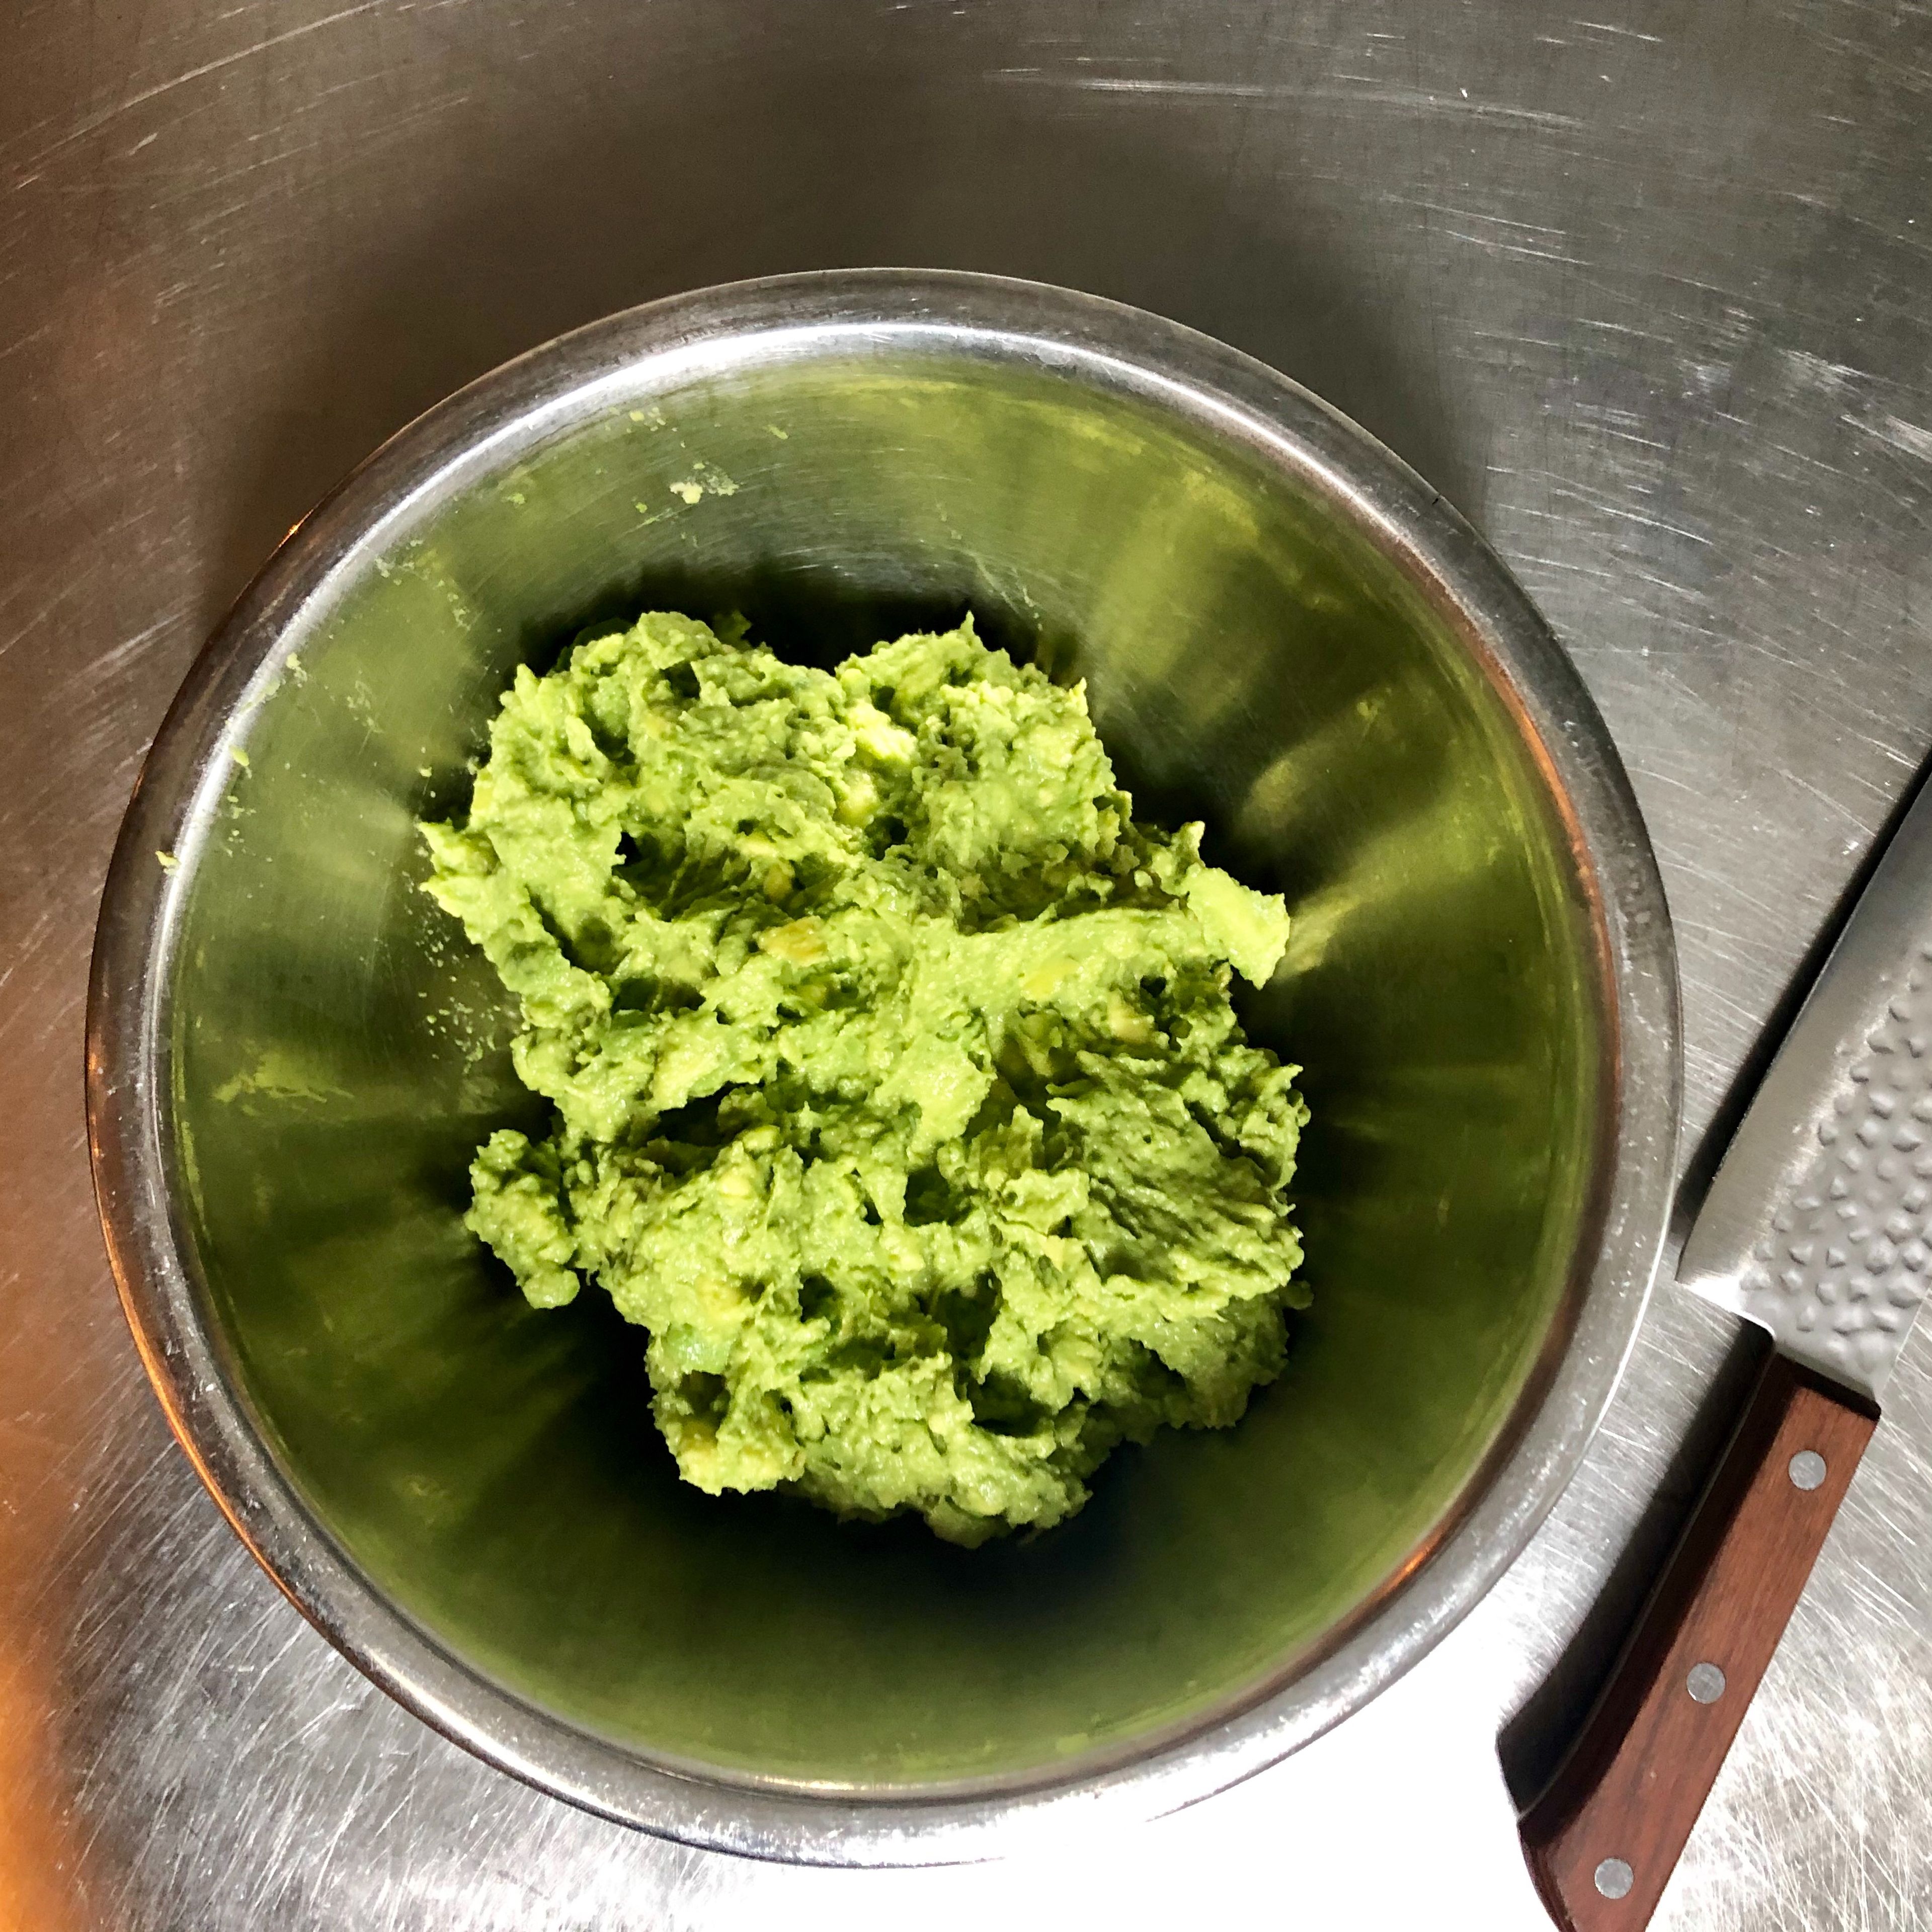 Using a fork, mash the avocado mixture to desired consistency. I like to leave the avocado just a little chunky in the guacamole.